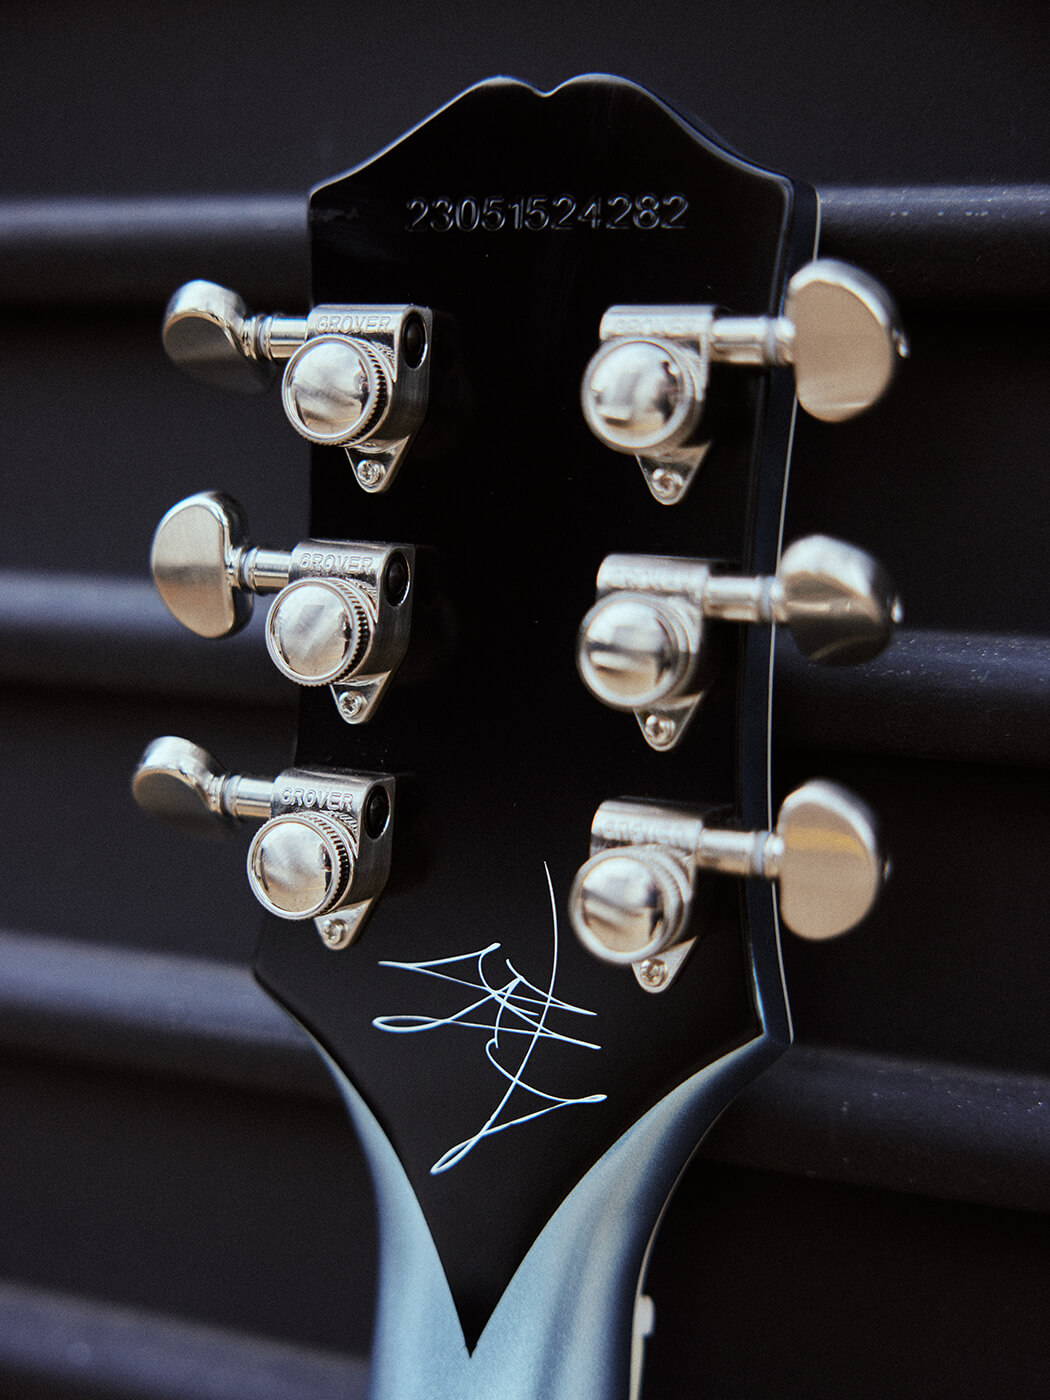 Back of the Epiphone Jared James Nichols “Blues Power” Les Paul Custom headstock with artist’s signature